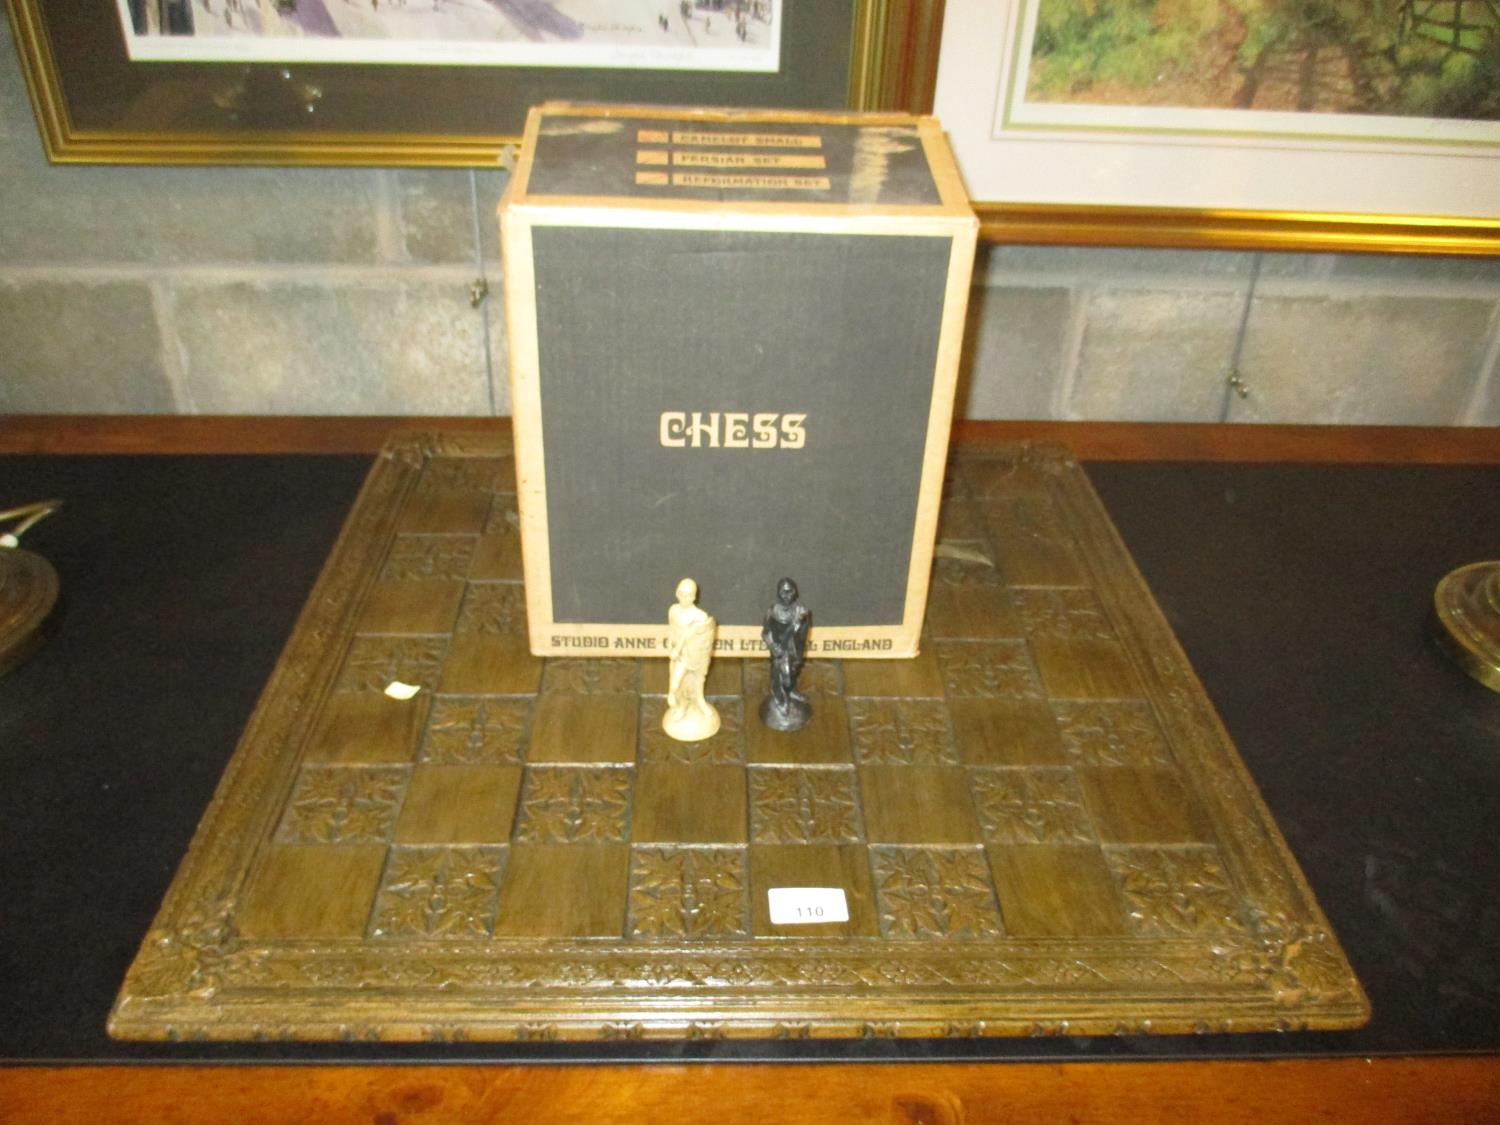 Camelot Chess Set by Studio Anne Carlton Ltd, along with a Chess Board